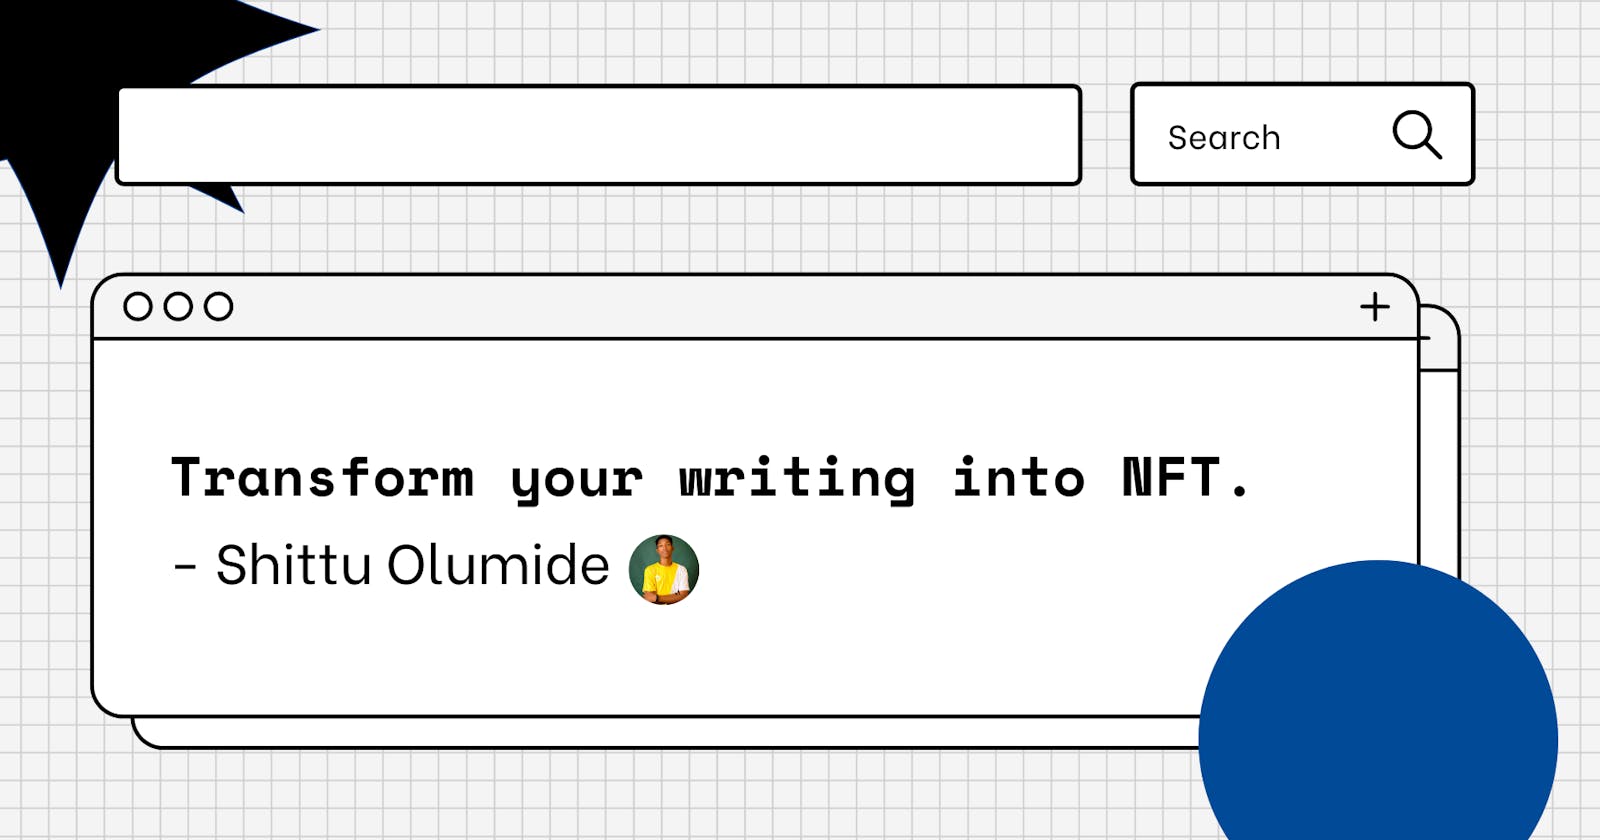 Transform your writing into NFT.